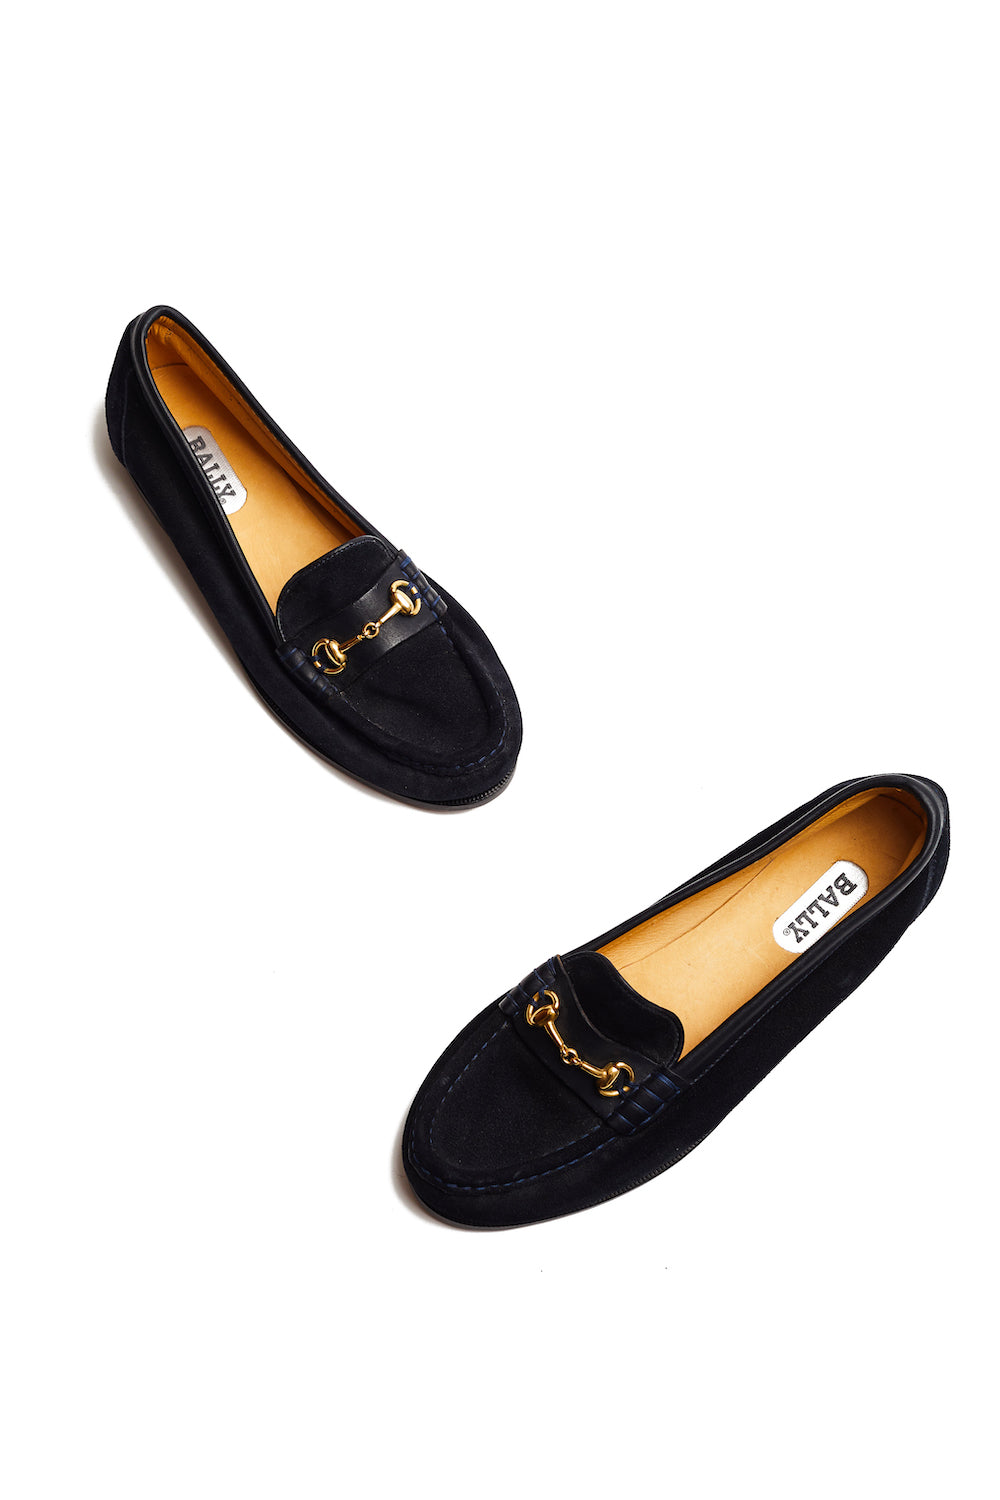 Bally <br> 80's suede loafers with gold horsebit detail